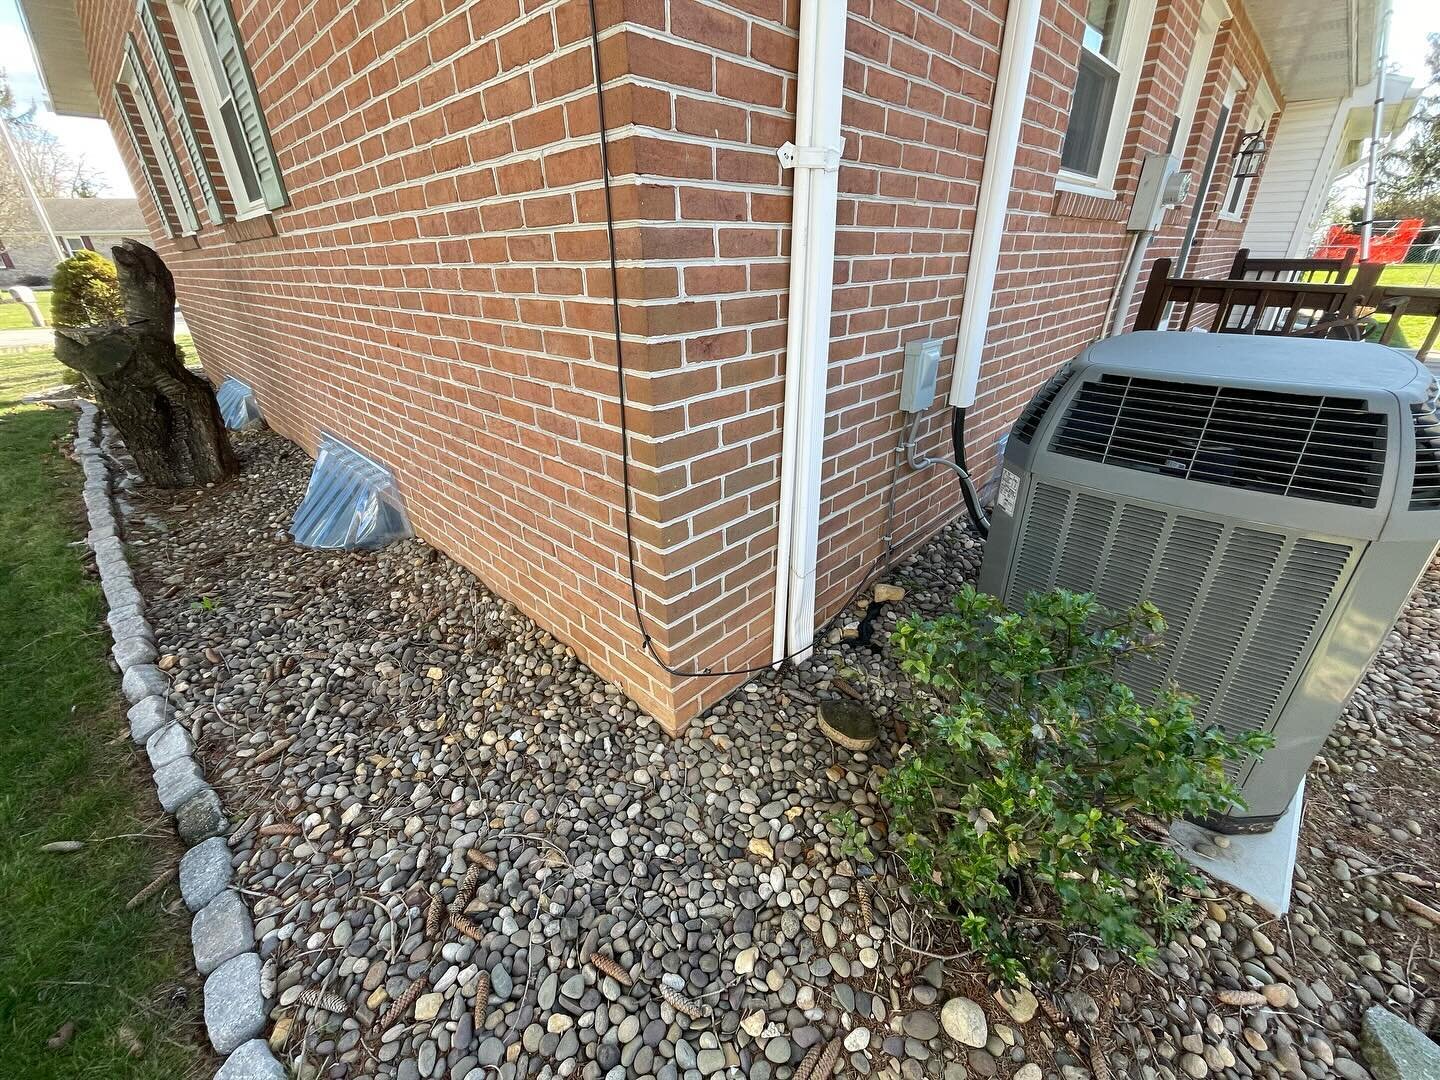 Cause and effect. Downspout goes into buried pipe. No one knows if it has ever gotten clogged, but, moisture is coming through the slab floor and block wall. Cause and effect. #homeinspection #downspout #basementfloor #propertyinspection